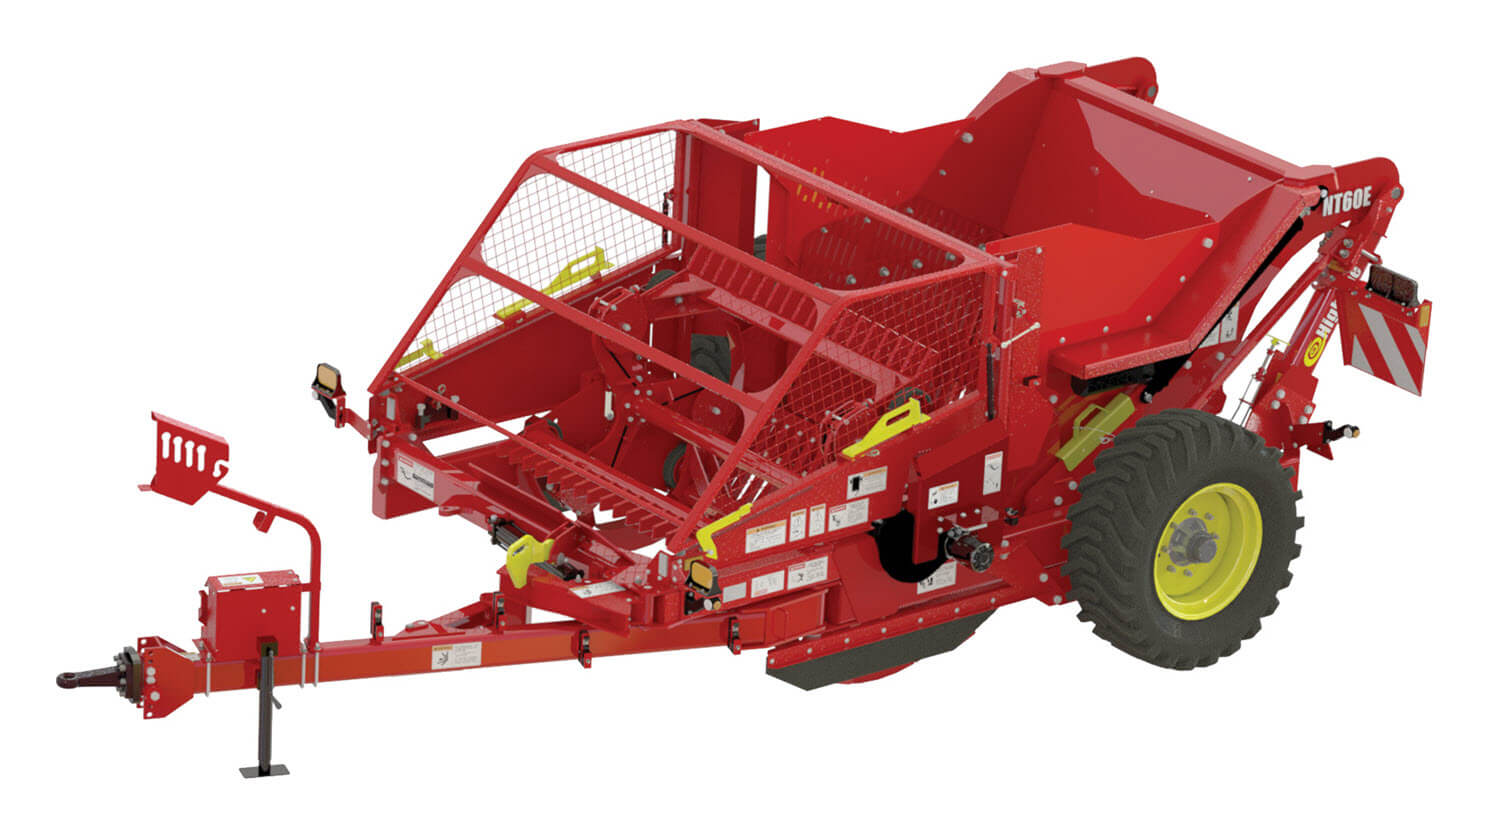 NT60E Rock Picker - Sold in EU countries only